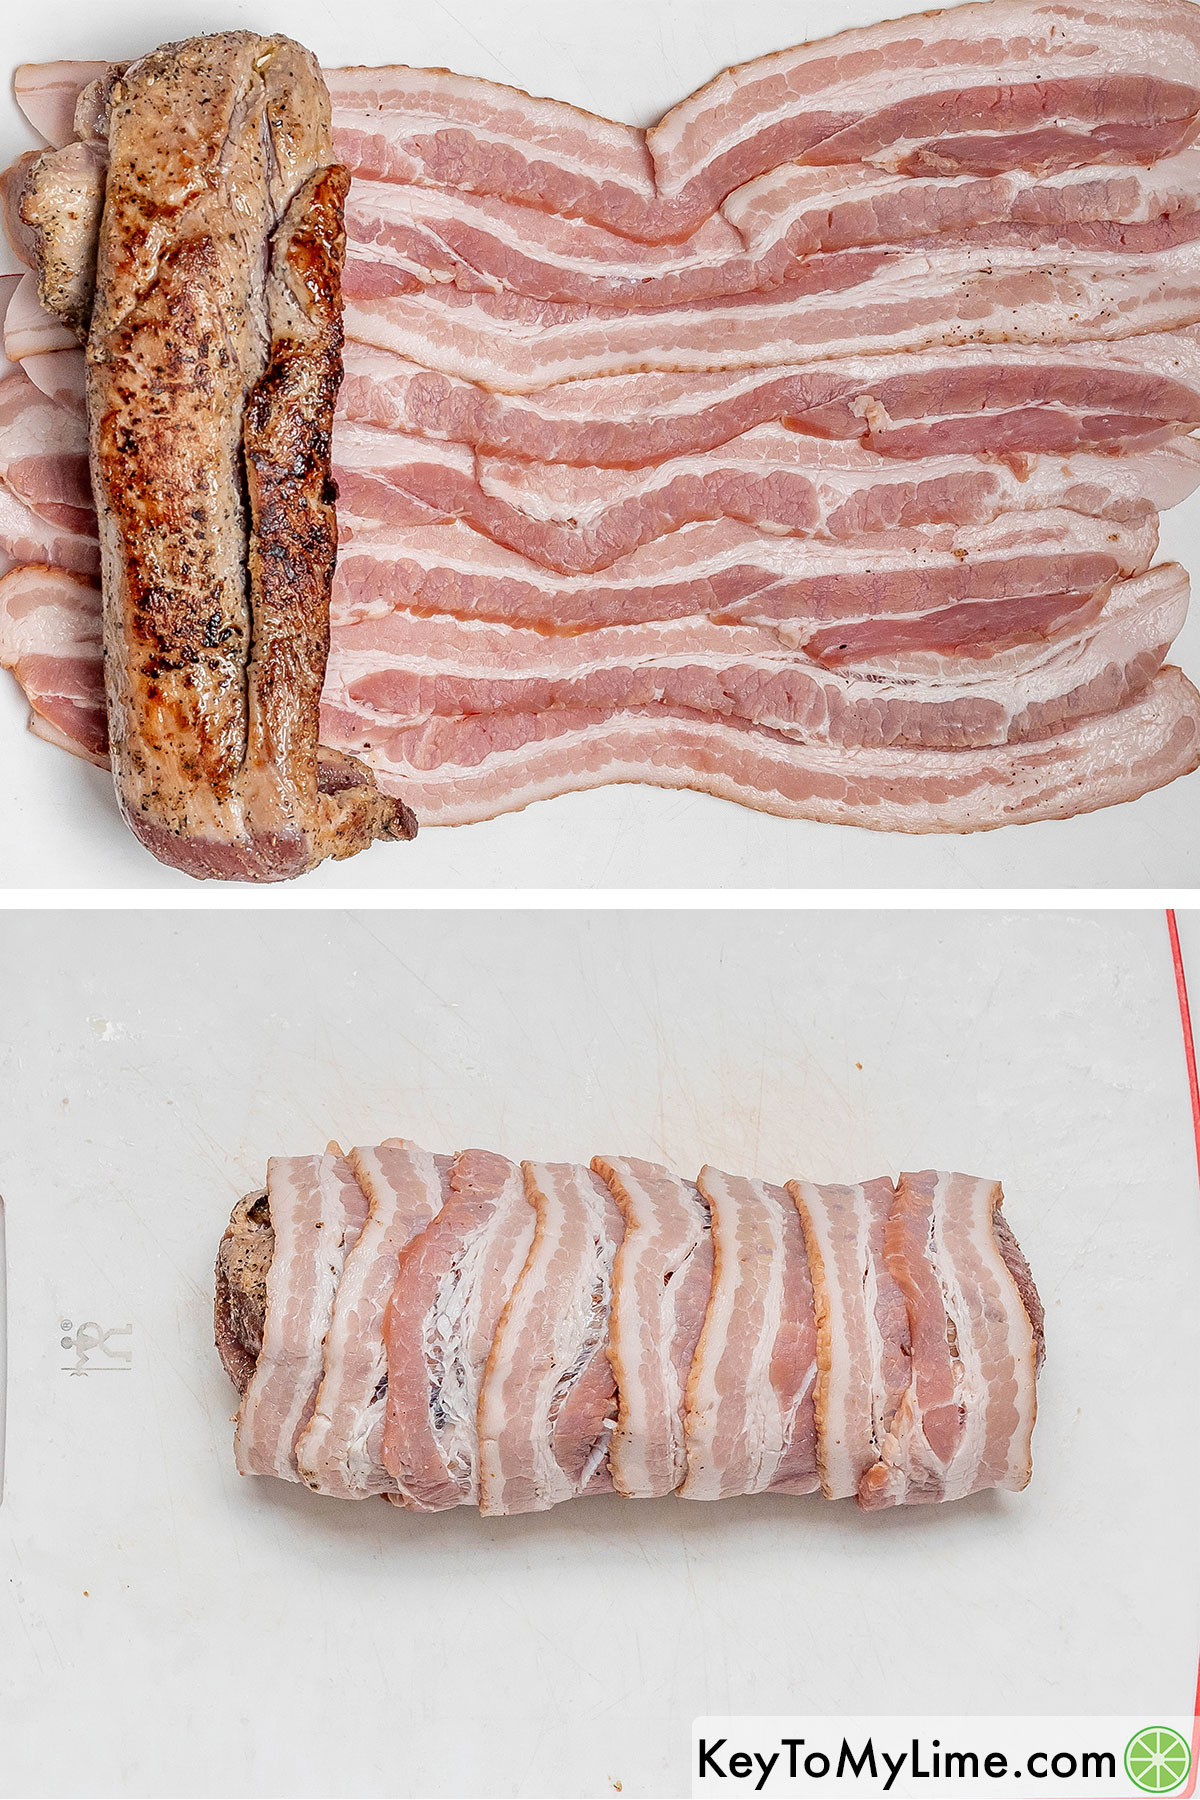 Adding the seared pork tenderloin to the slices of bacon, and then wrapping around until fully covered.